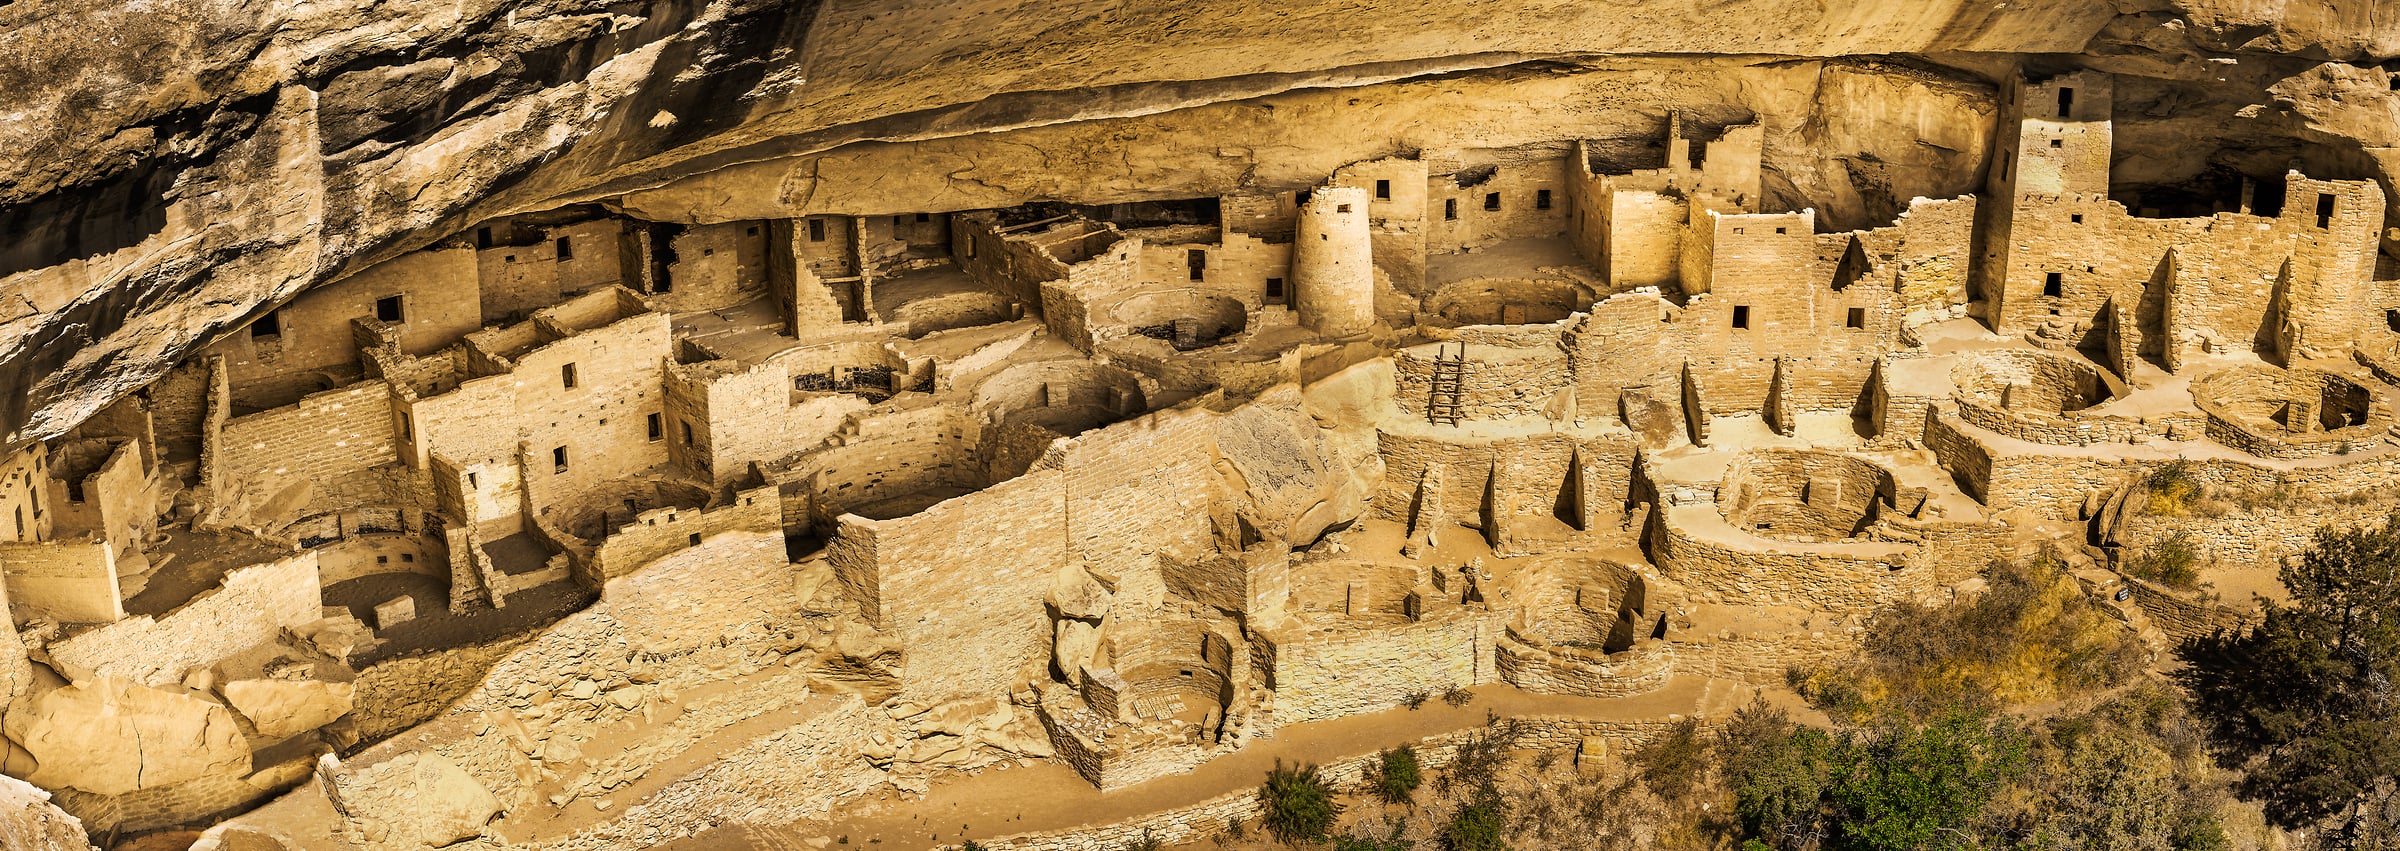 276 megapixels! A very high resolution, large-format panorama photo of the dwellings at Mesa Verde National Park; panorama photograph created by David David in Colorado.